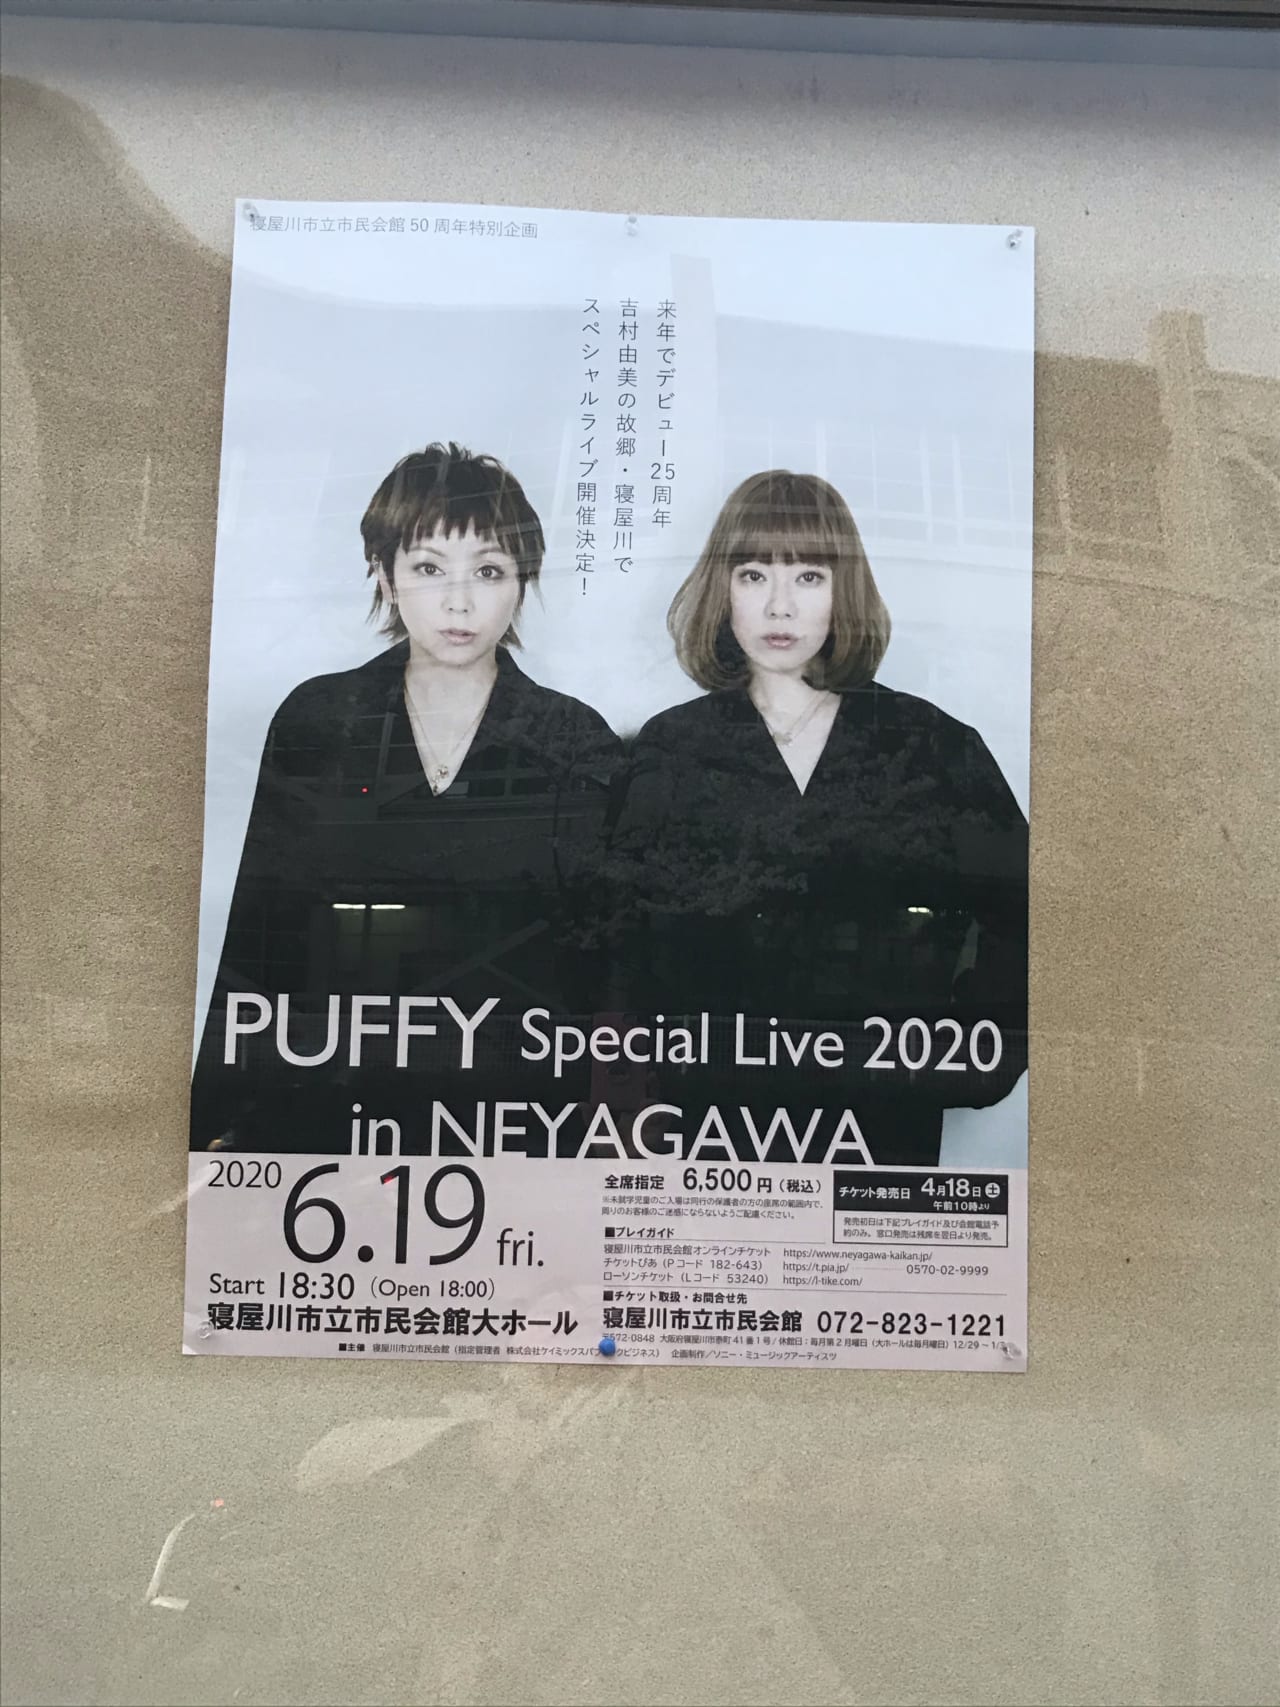 Puffy special live